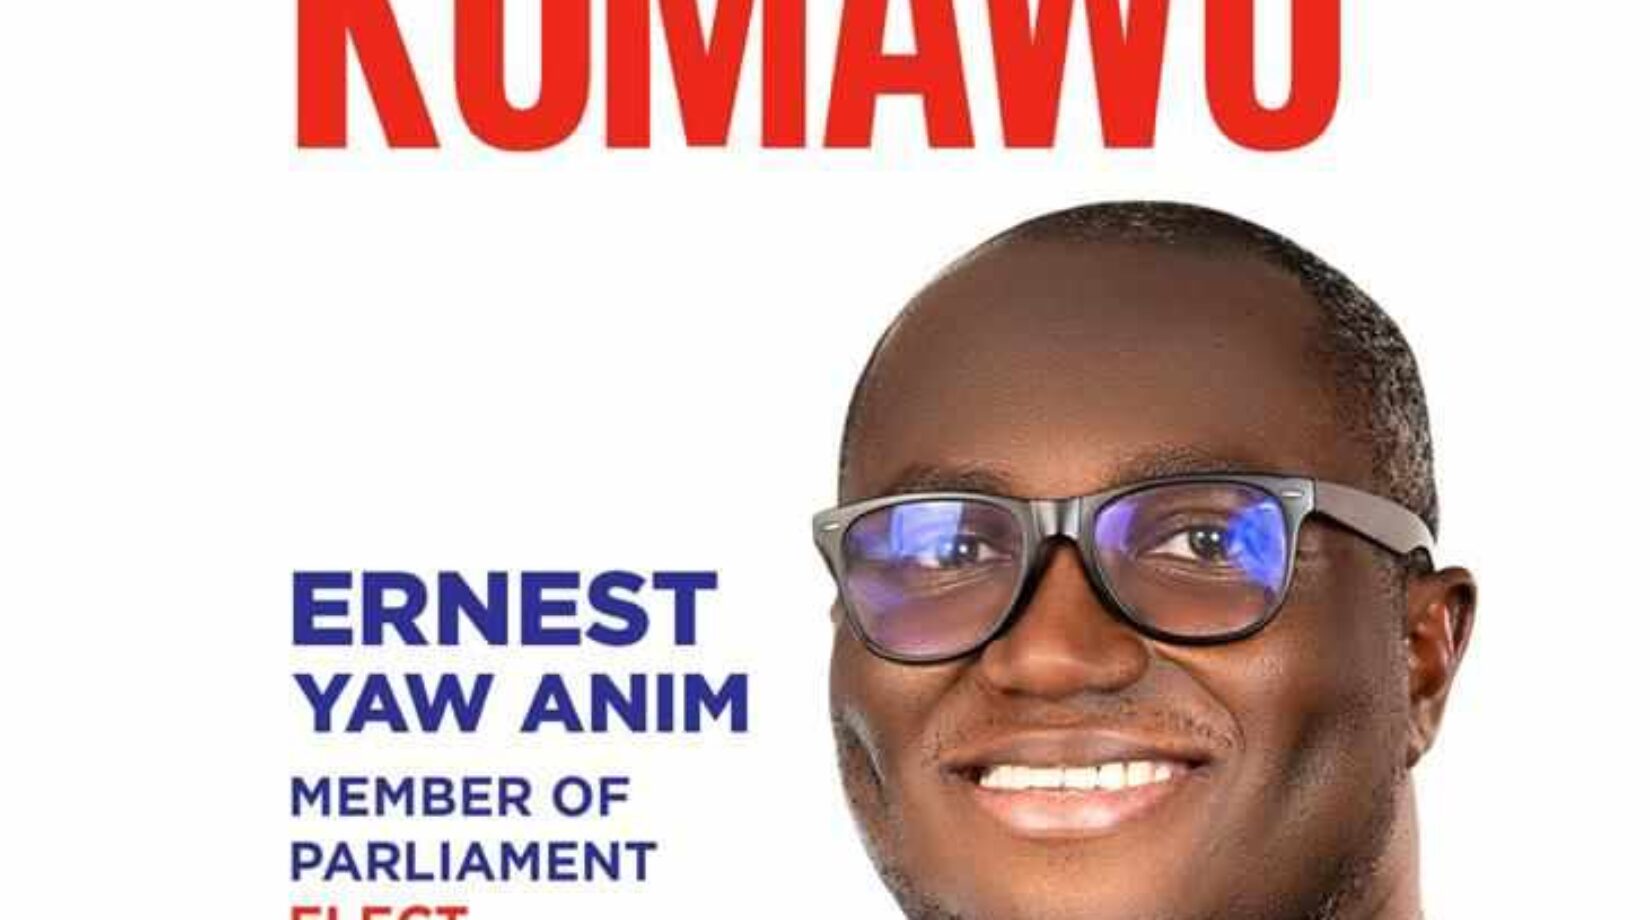 IGNORE NDC’s VILE PROPAGANDA; THEY FAILED WOEFULLY IN KUMAWU, THE FACTS & FIGURES HAVE EXPOSED THEM-Nana B writes